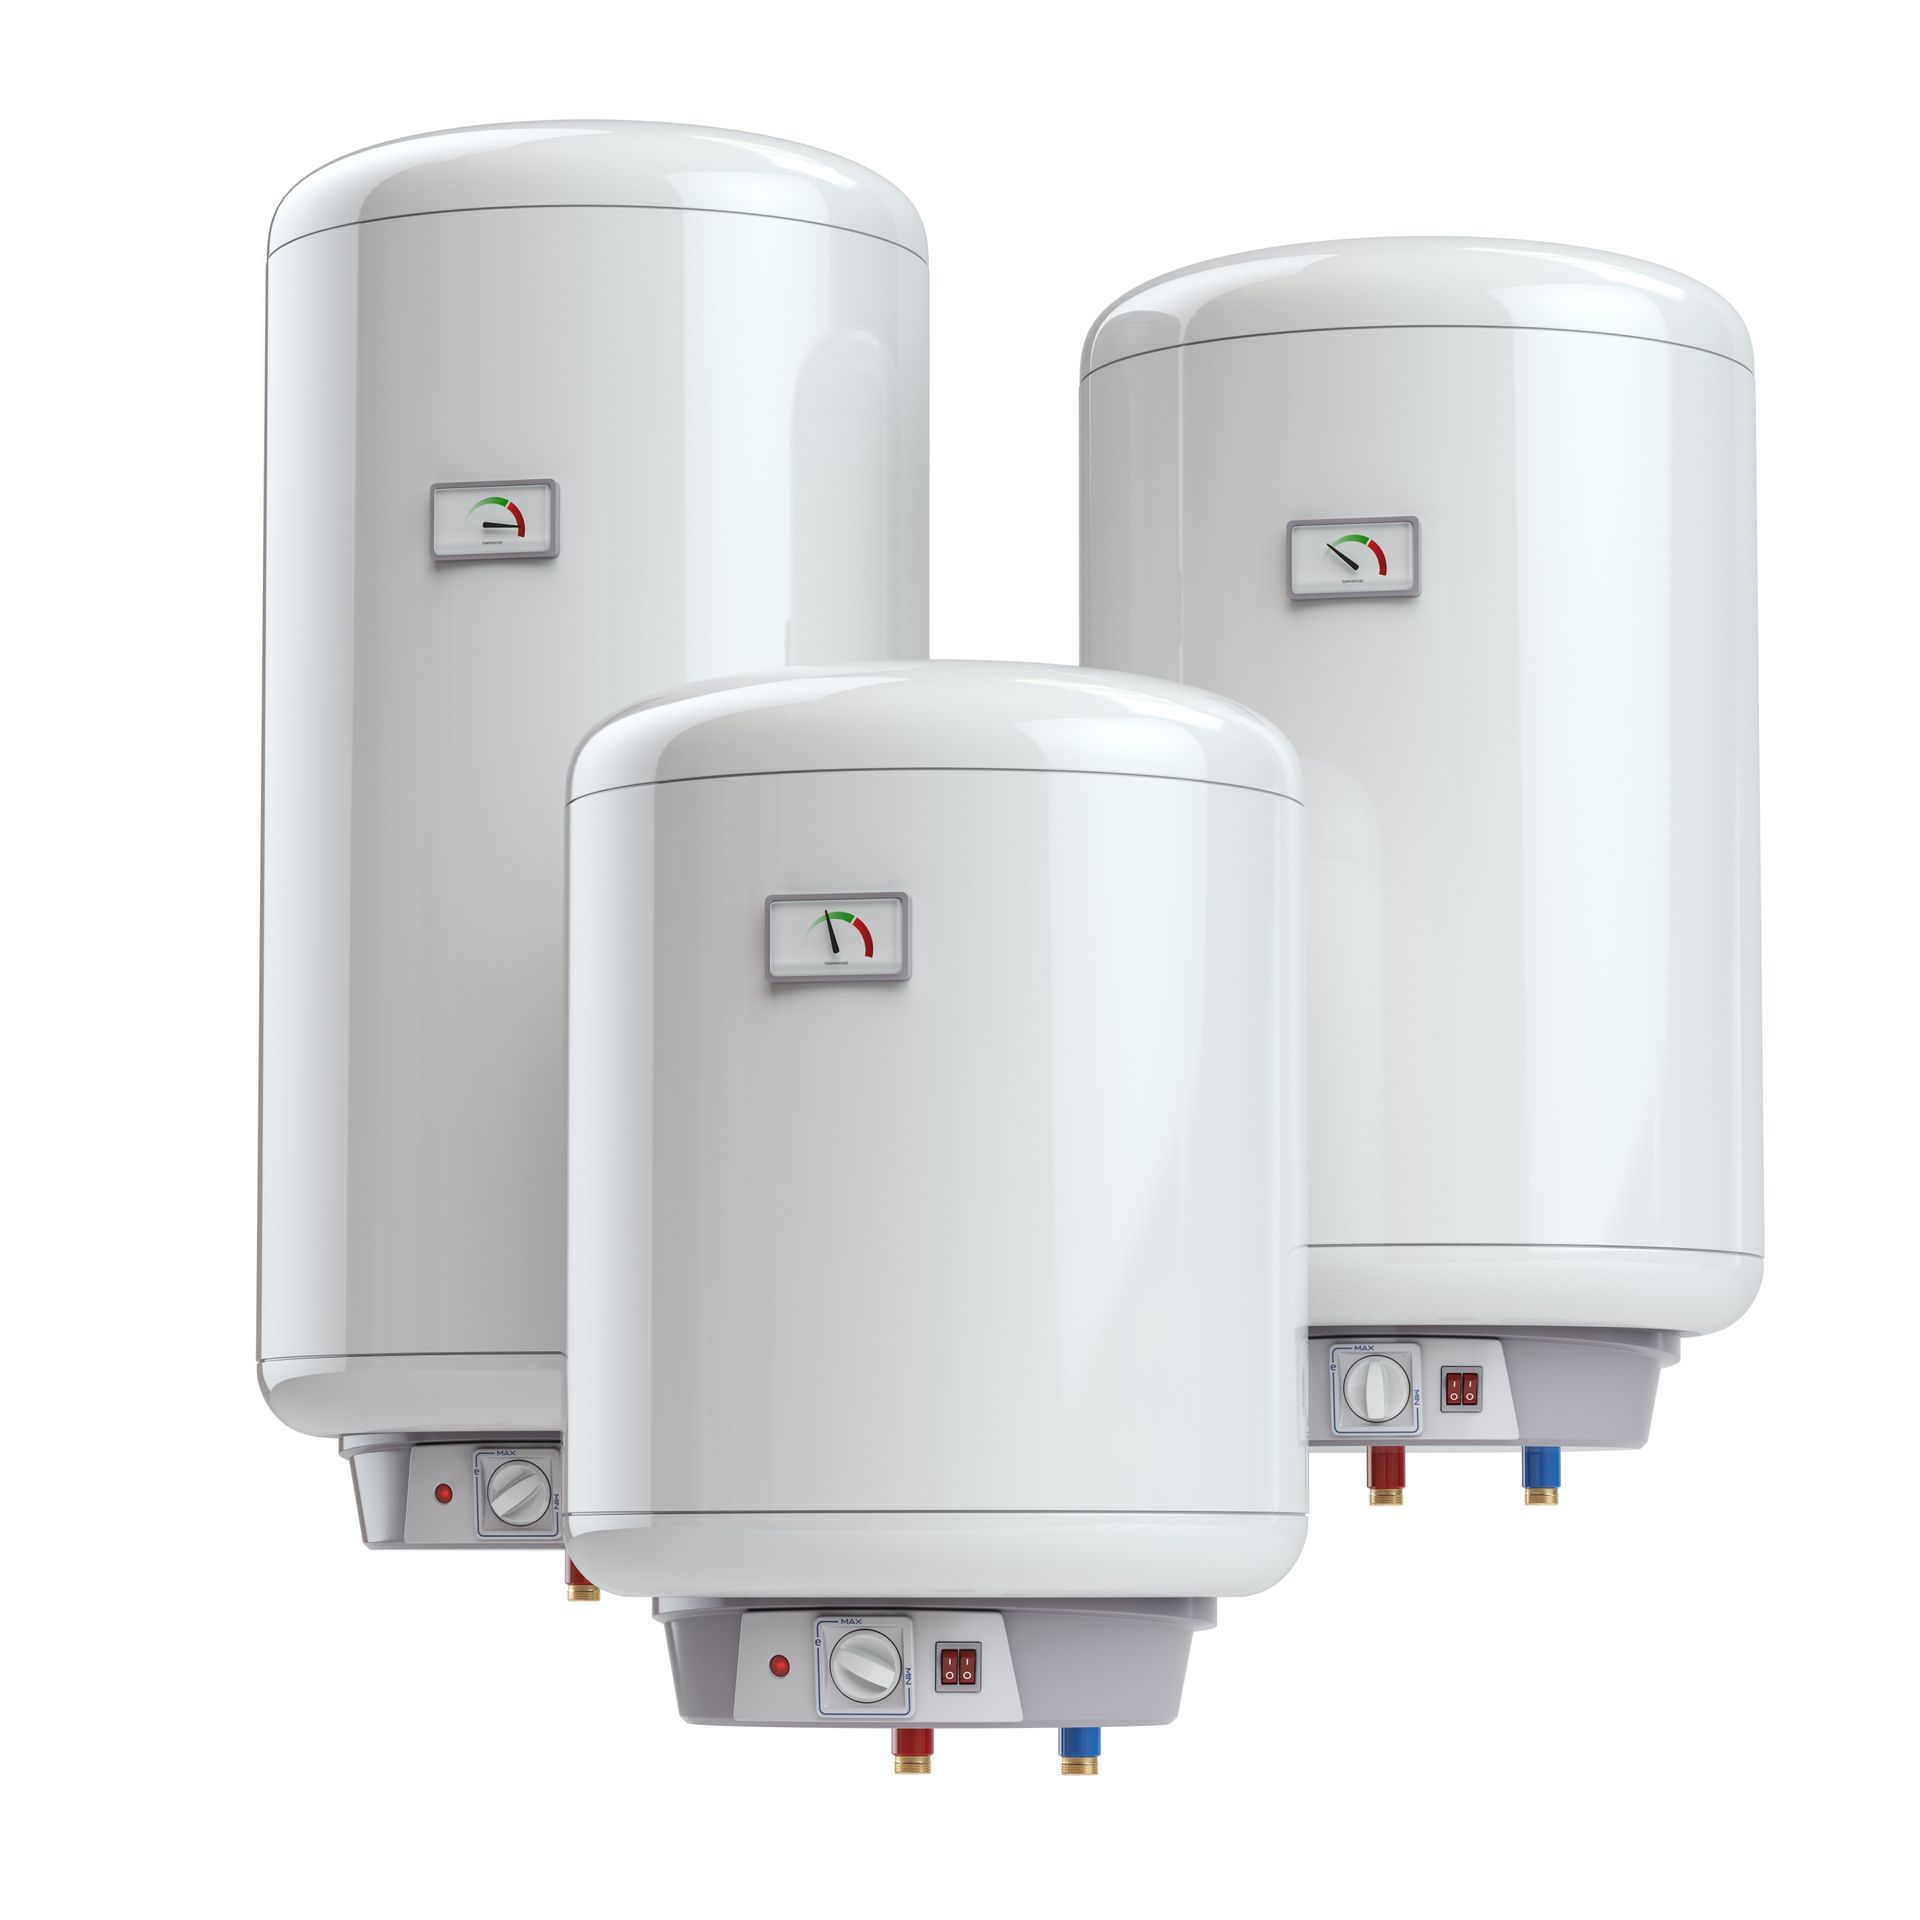 three boilers of different sizes